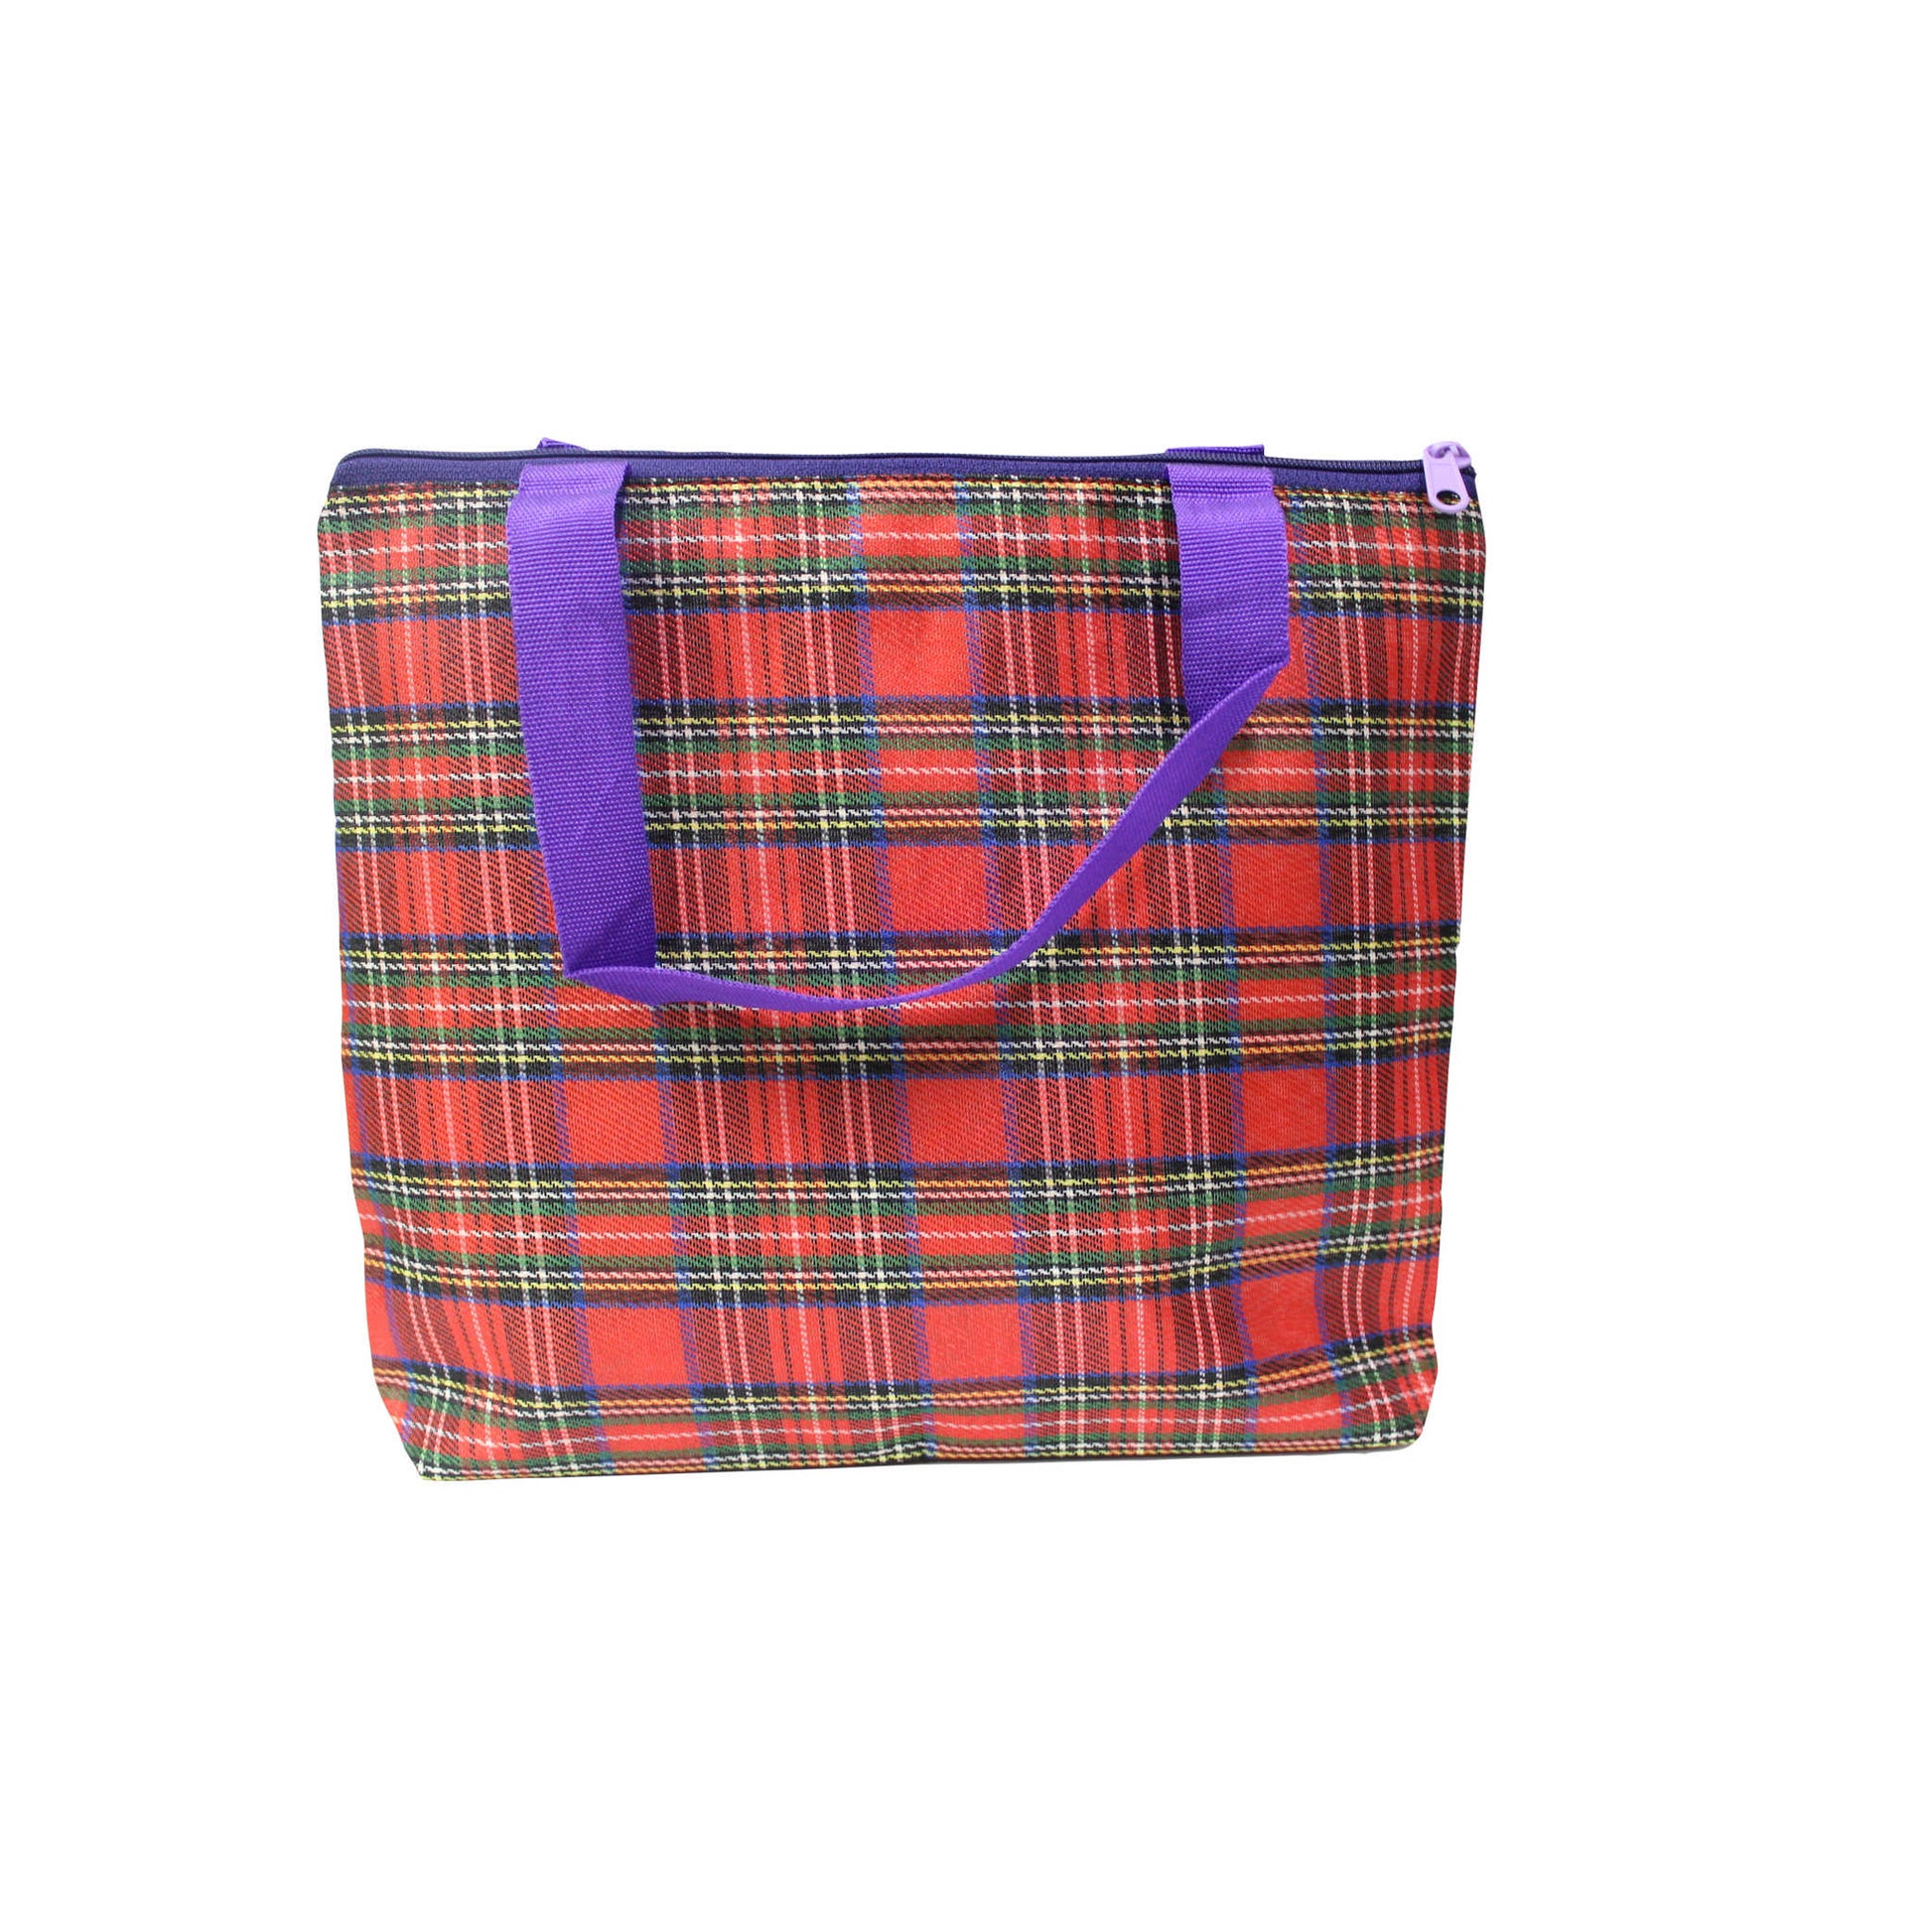 Indian Petals Imported Durable Canvas Printed multi purpose Bag with handles for girls and ladies, Theme Scottish Checks, Large, Lavender